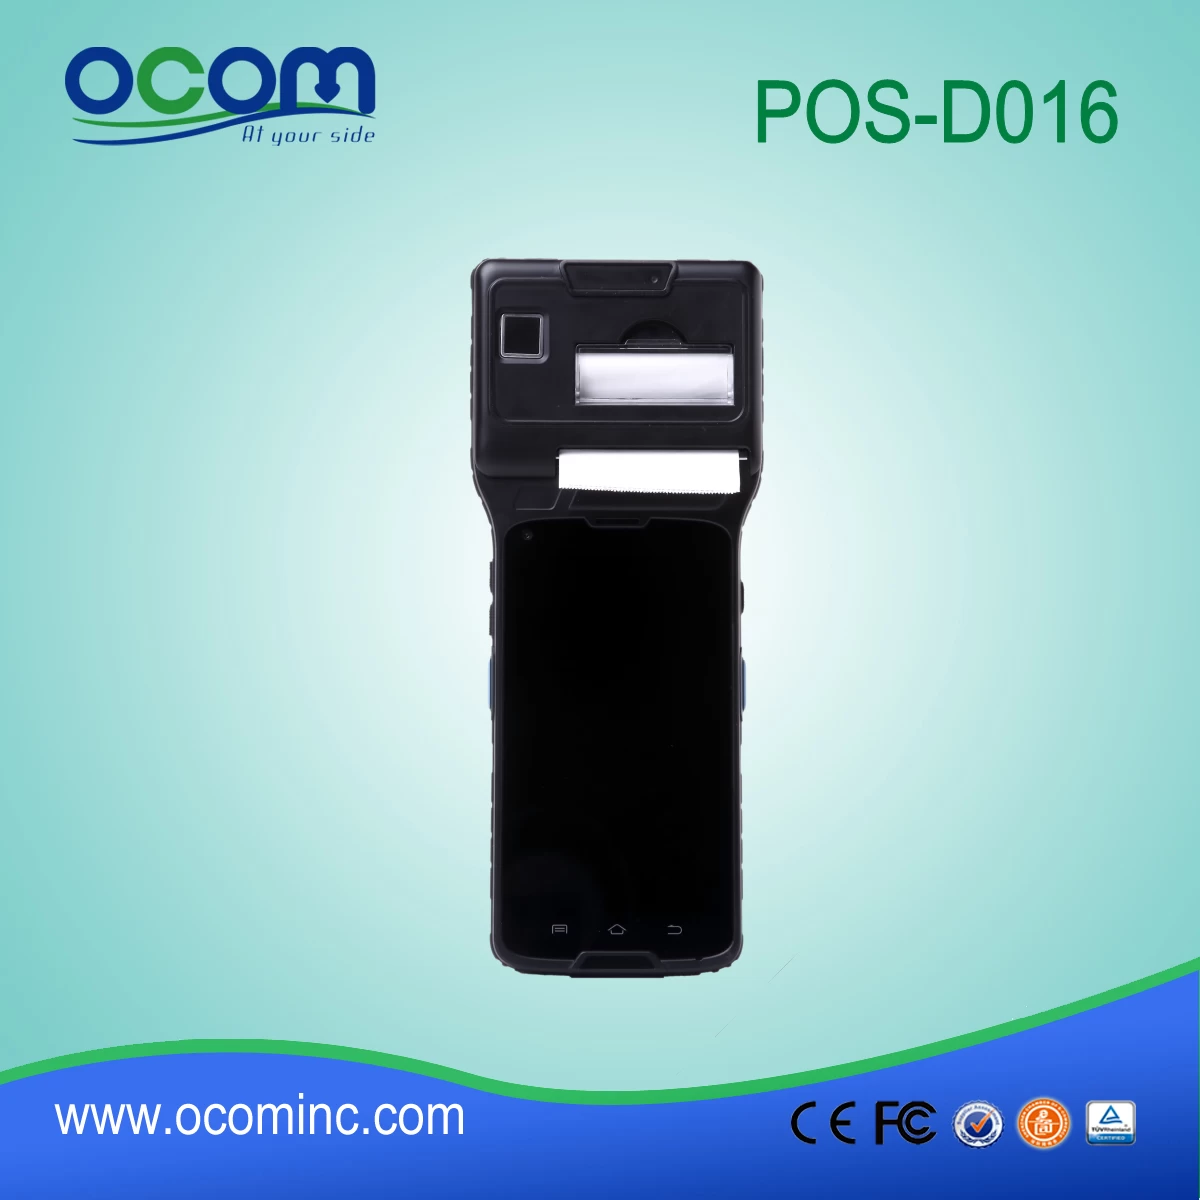 5'' Touch Screen Pos Terminal with 3G(WCDMA)+ WIFI+BT+ GPS+ camera+ thermal printer+ NFC (OCBS-D016)